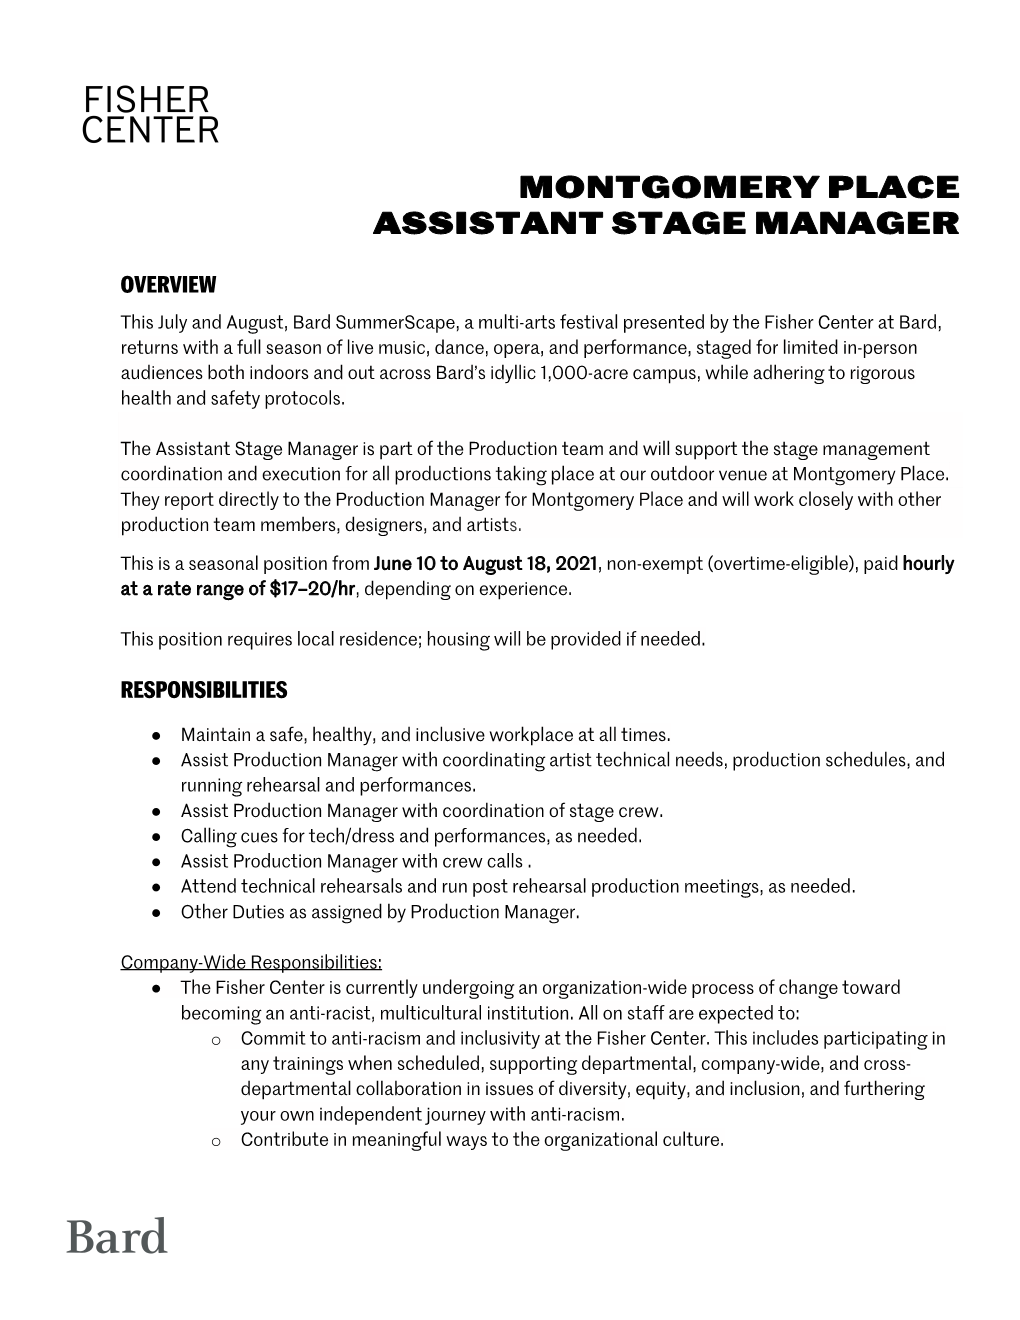 Montgomery Place Assistant Stage Manager